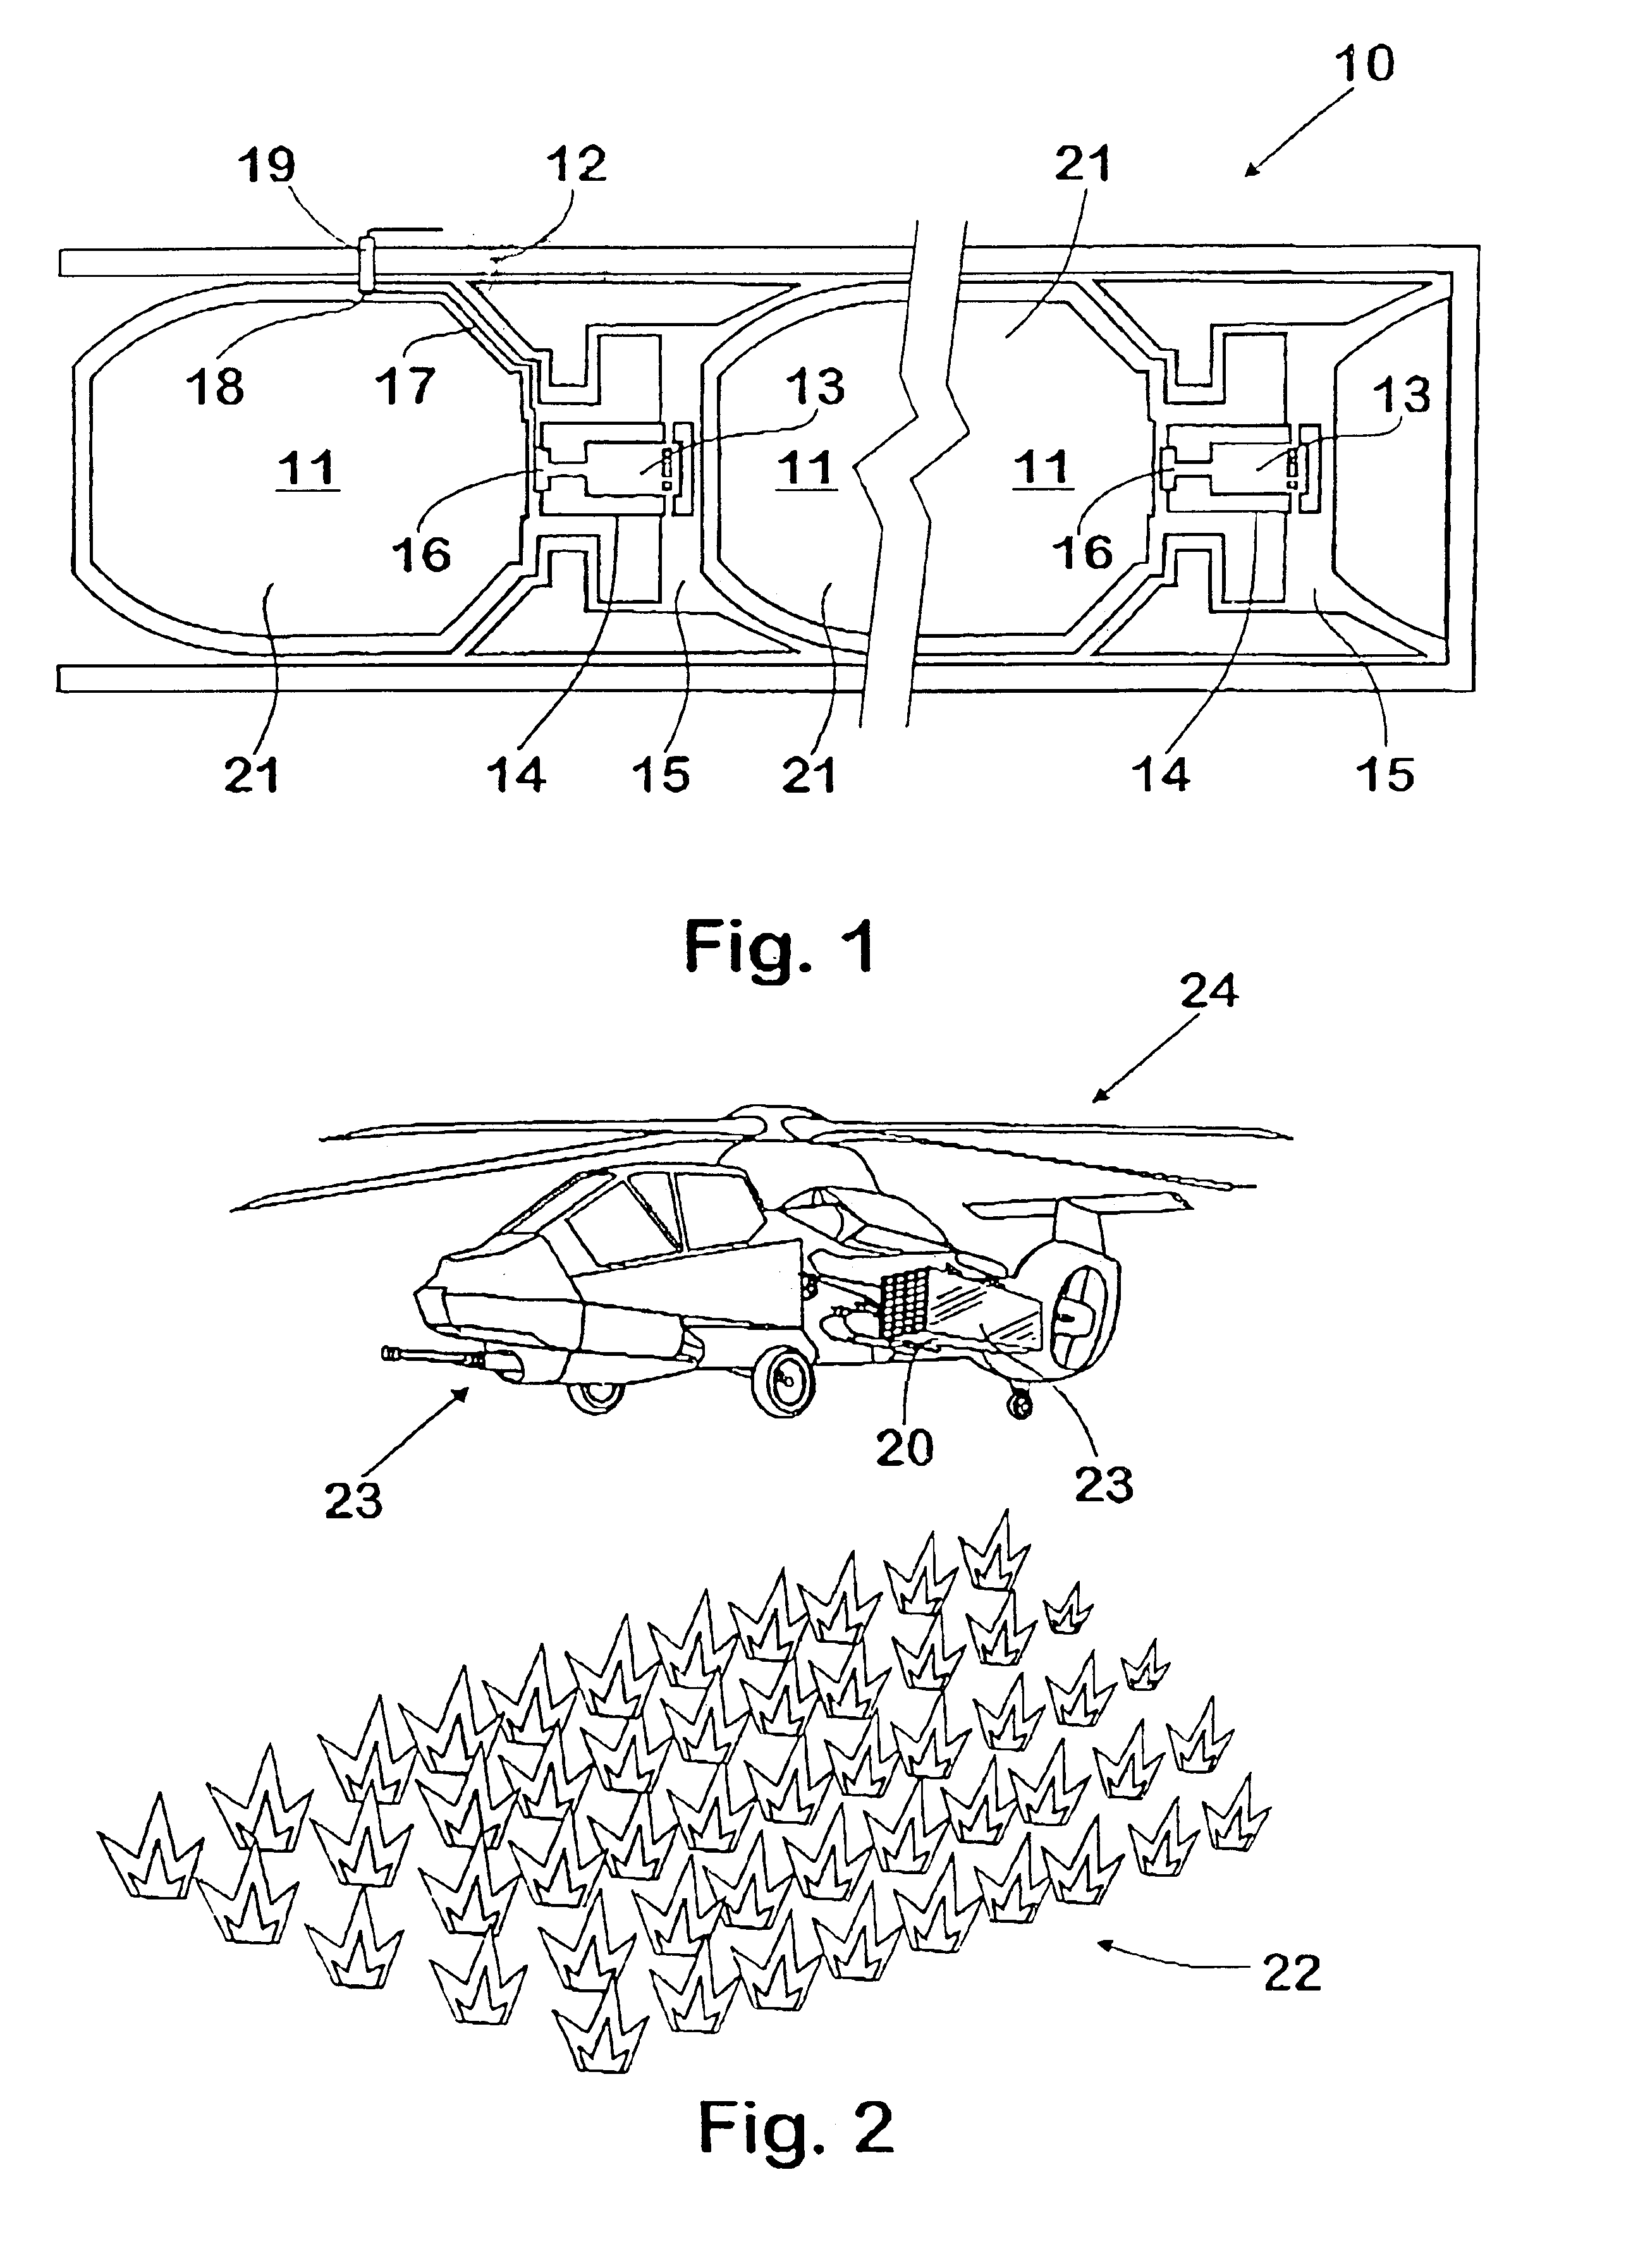 Method for seismic exploration of a remote site